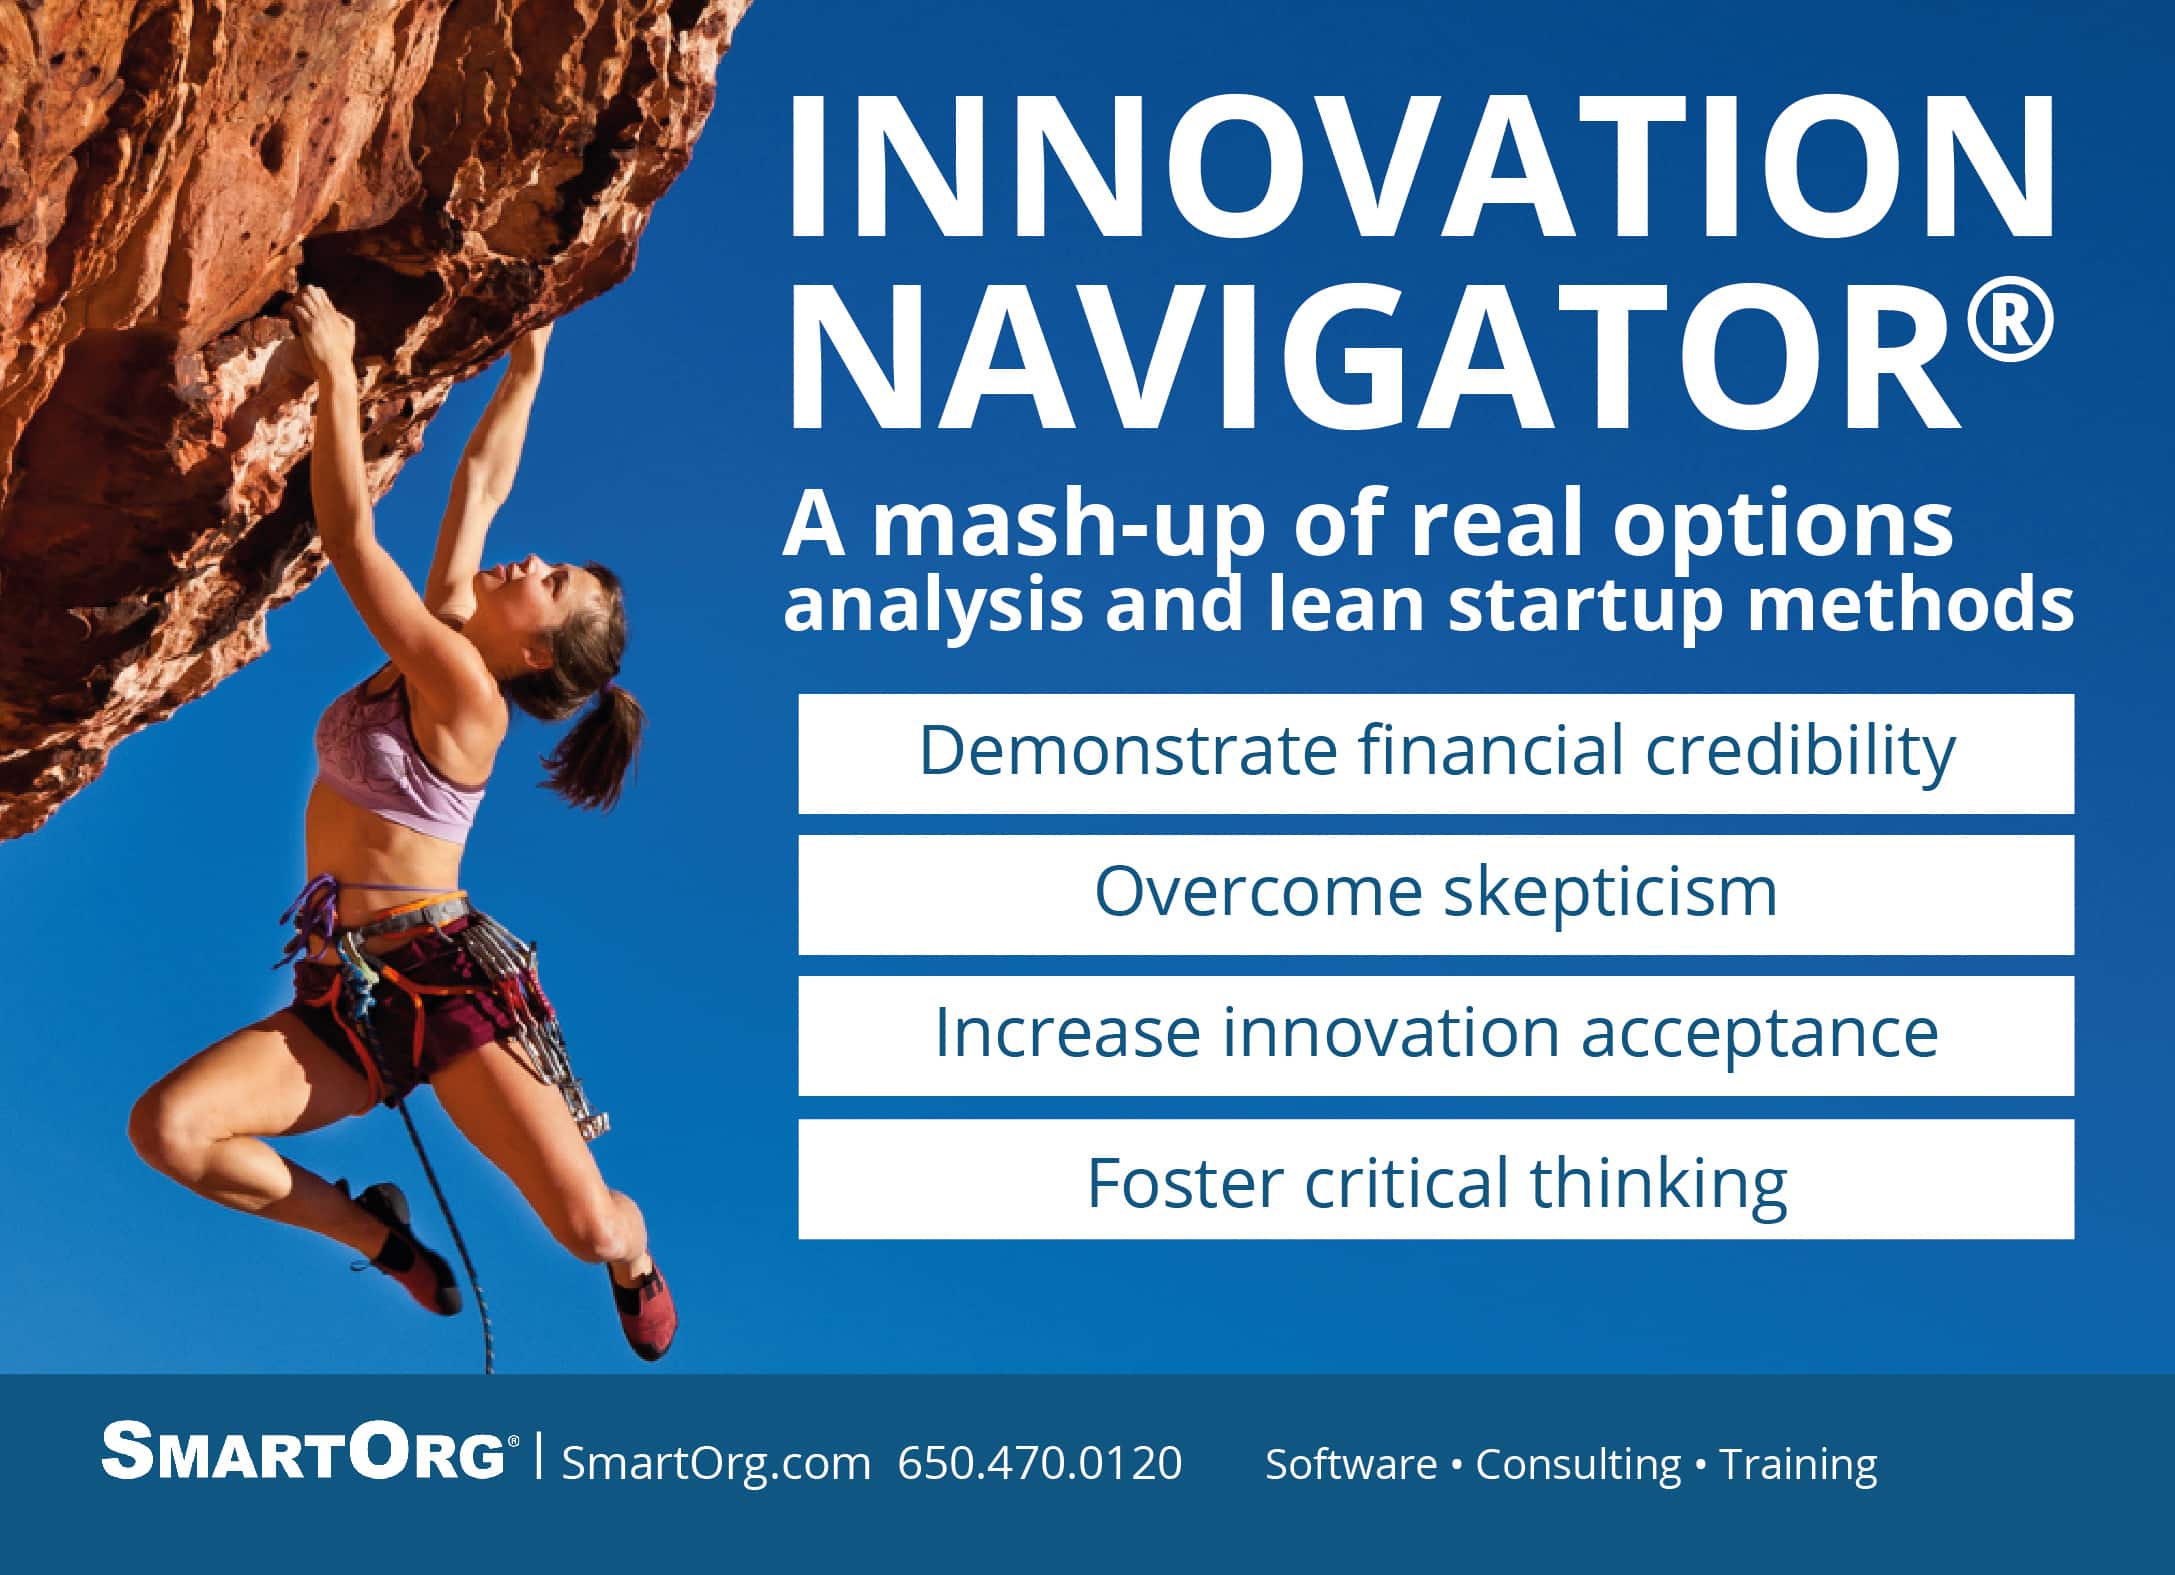 Innovation Navigator, a mash-up of Real Options analysis and Lean Startup methods